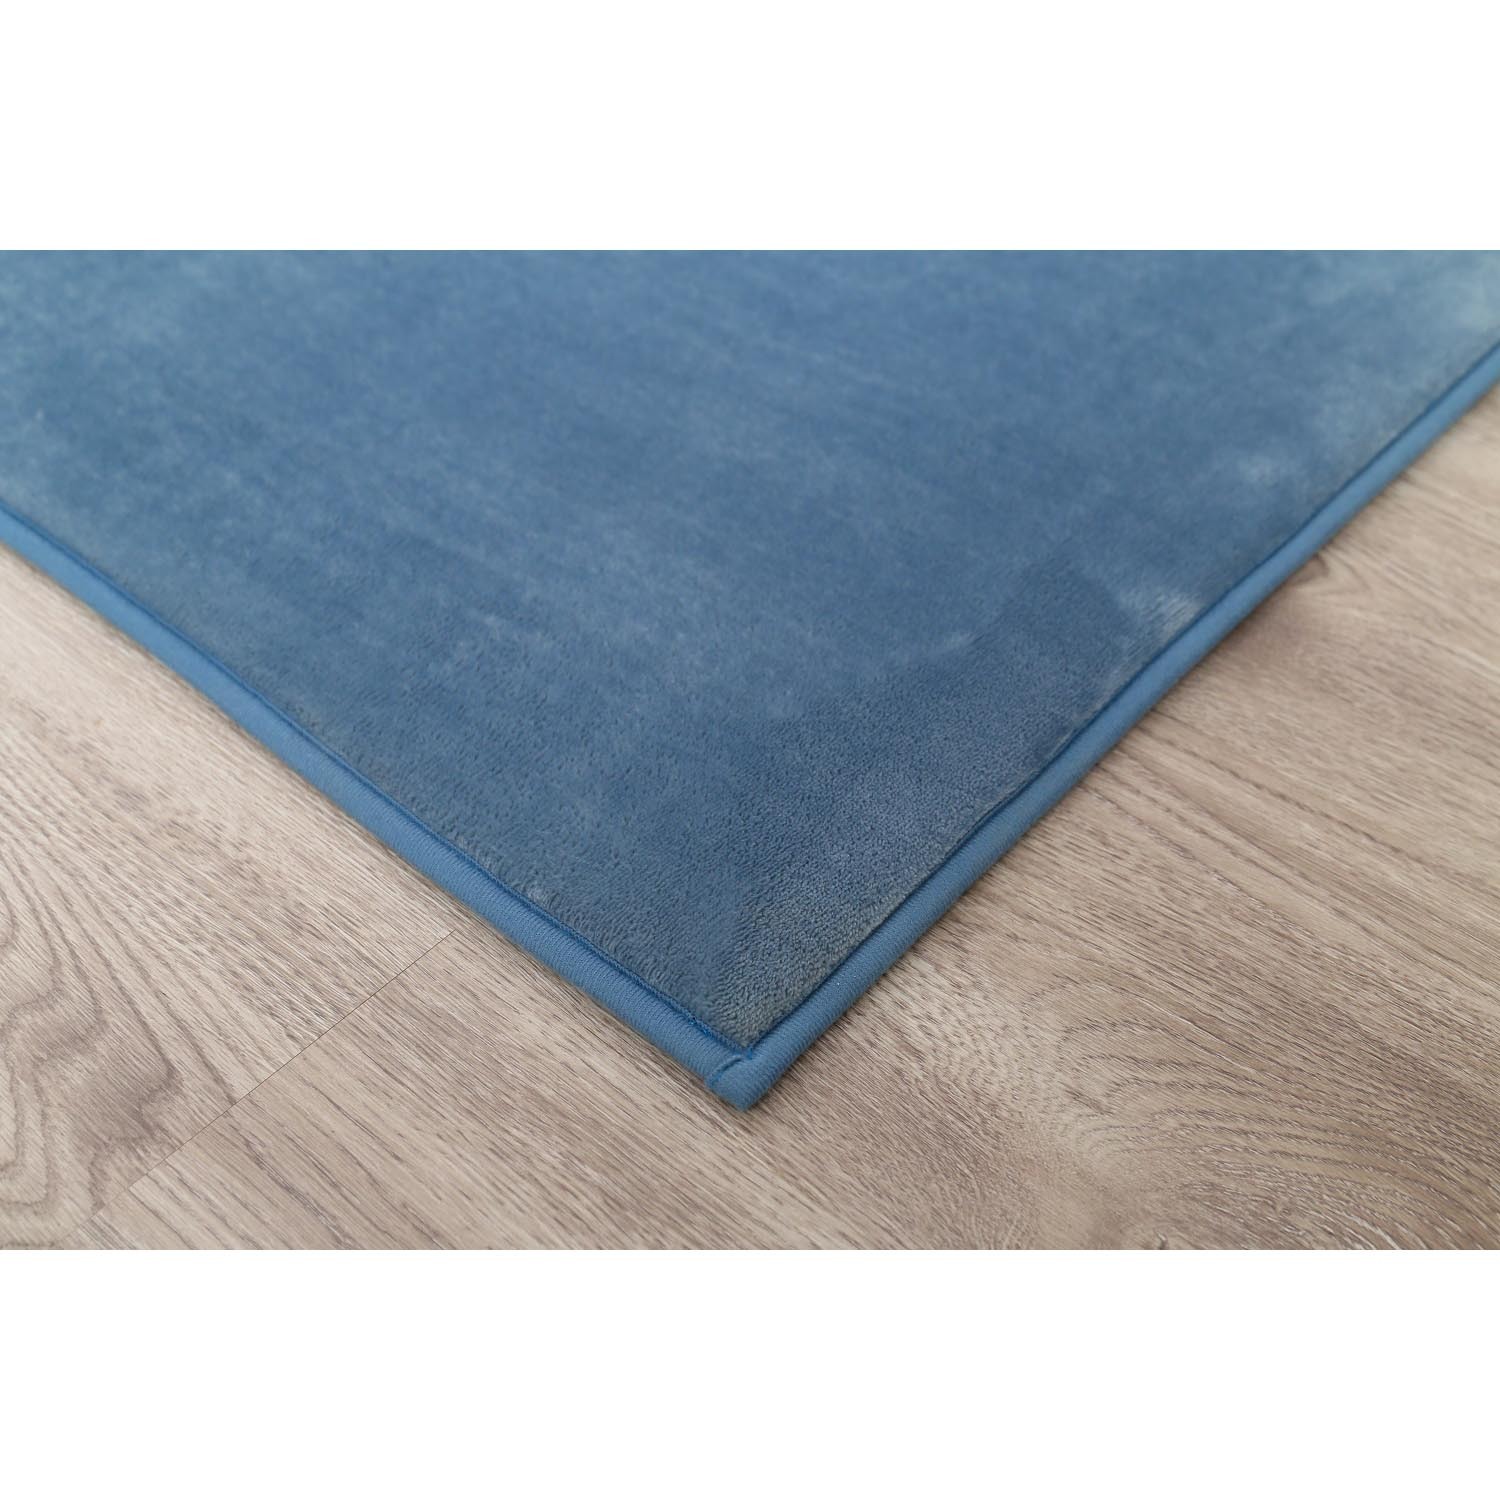 Blue Flannel Cosy Rug 160 x 110cm Image 3